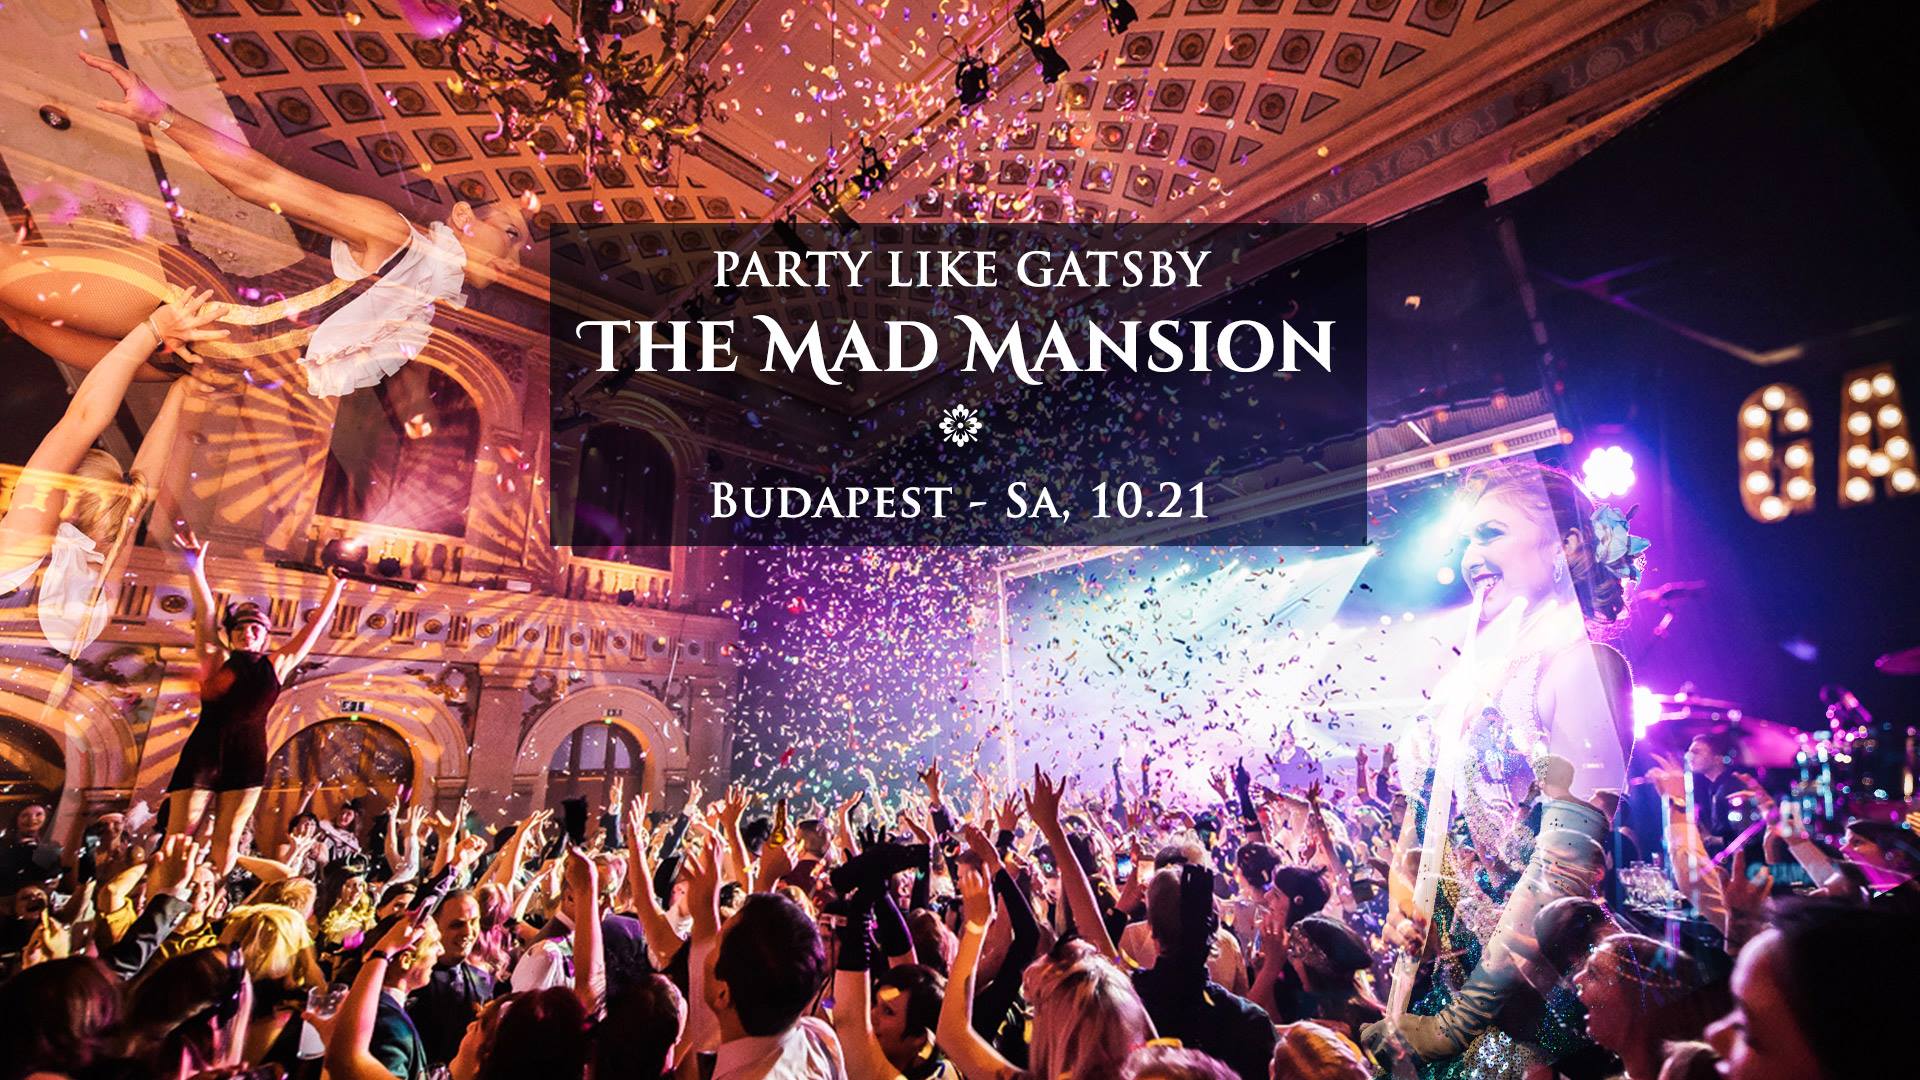 Party like Gatsby Budapest - The Mad Mansion